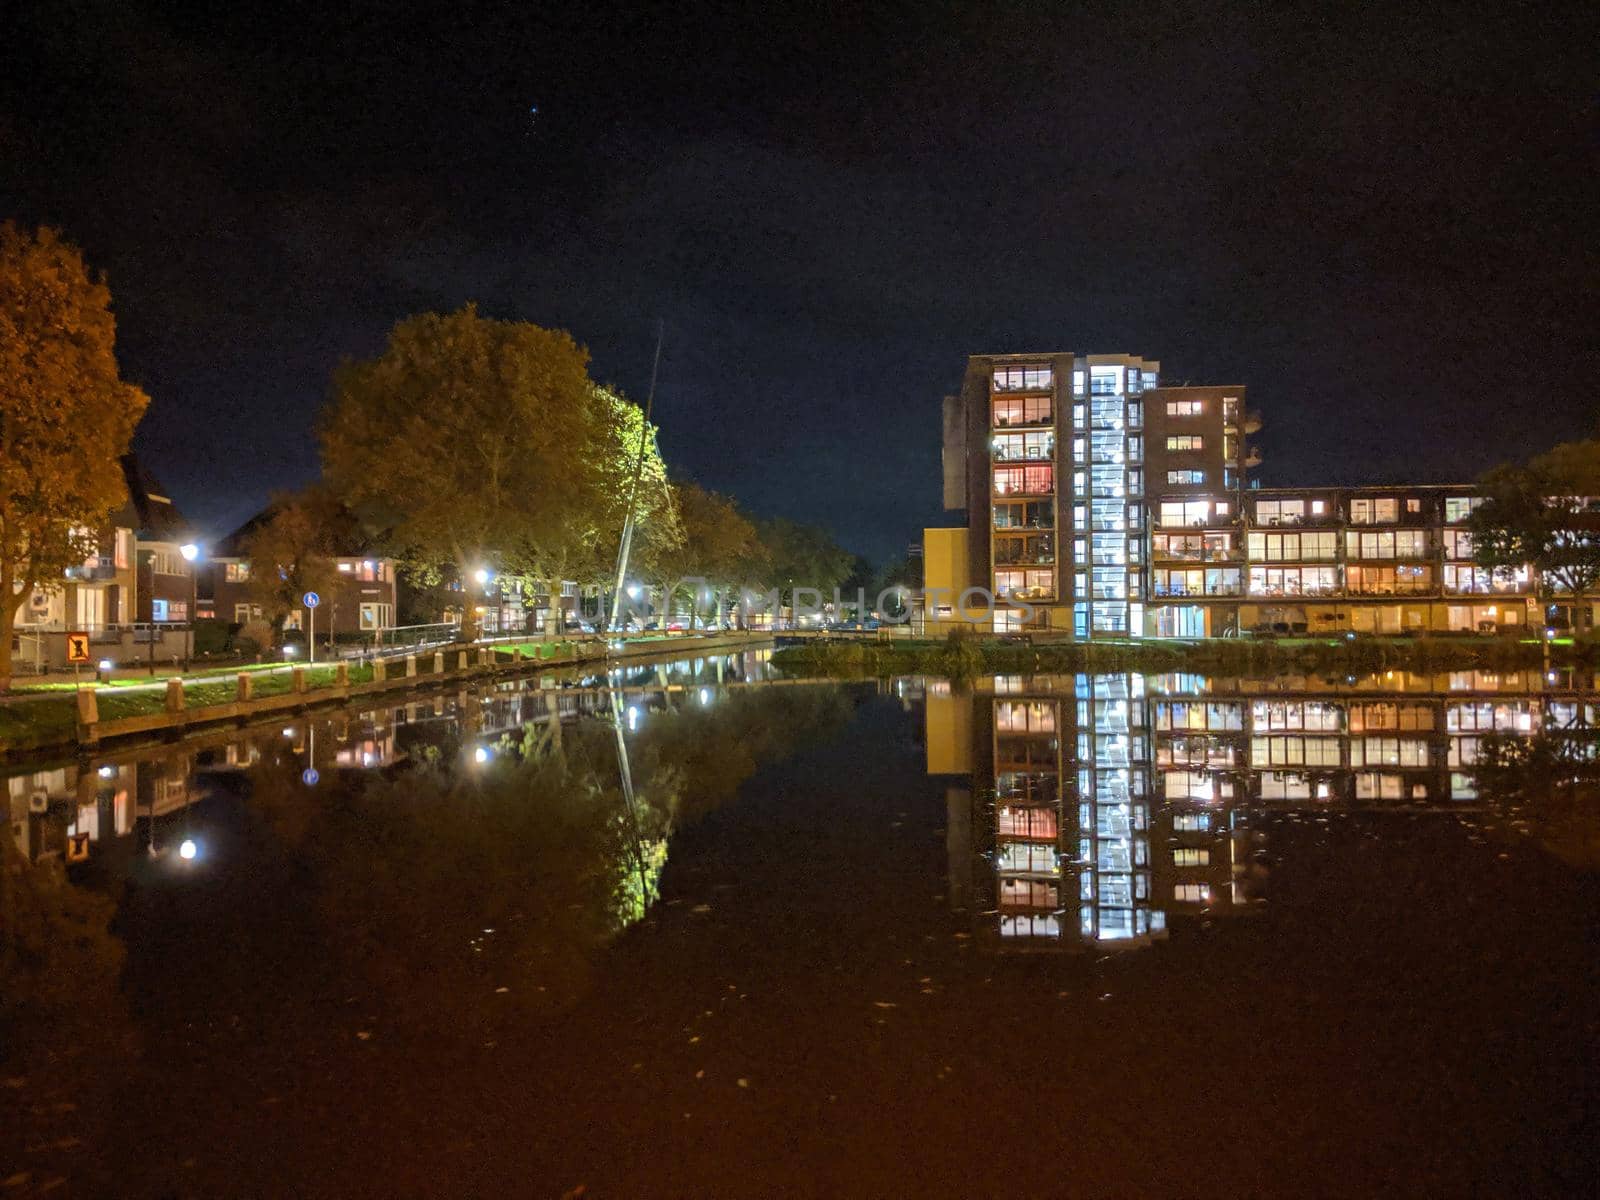 Housing along the canal at night in Sneek by traveltelly